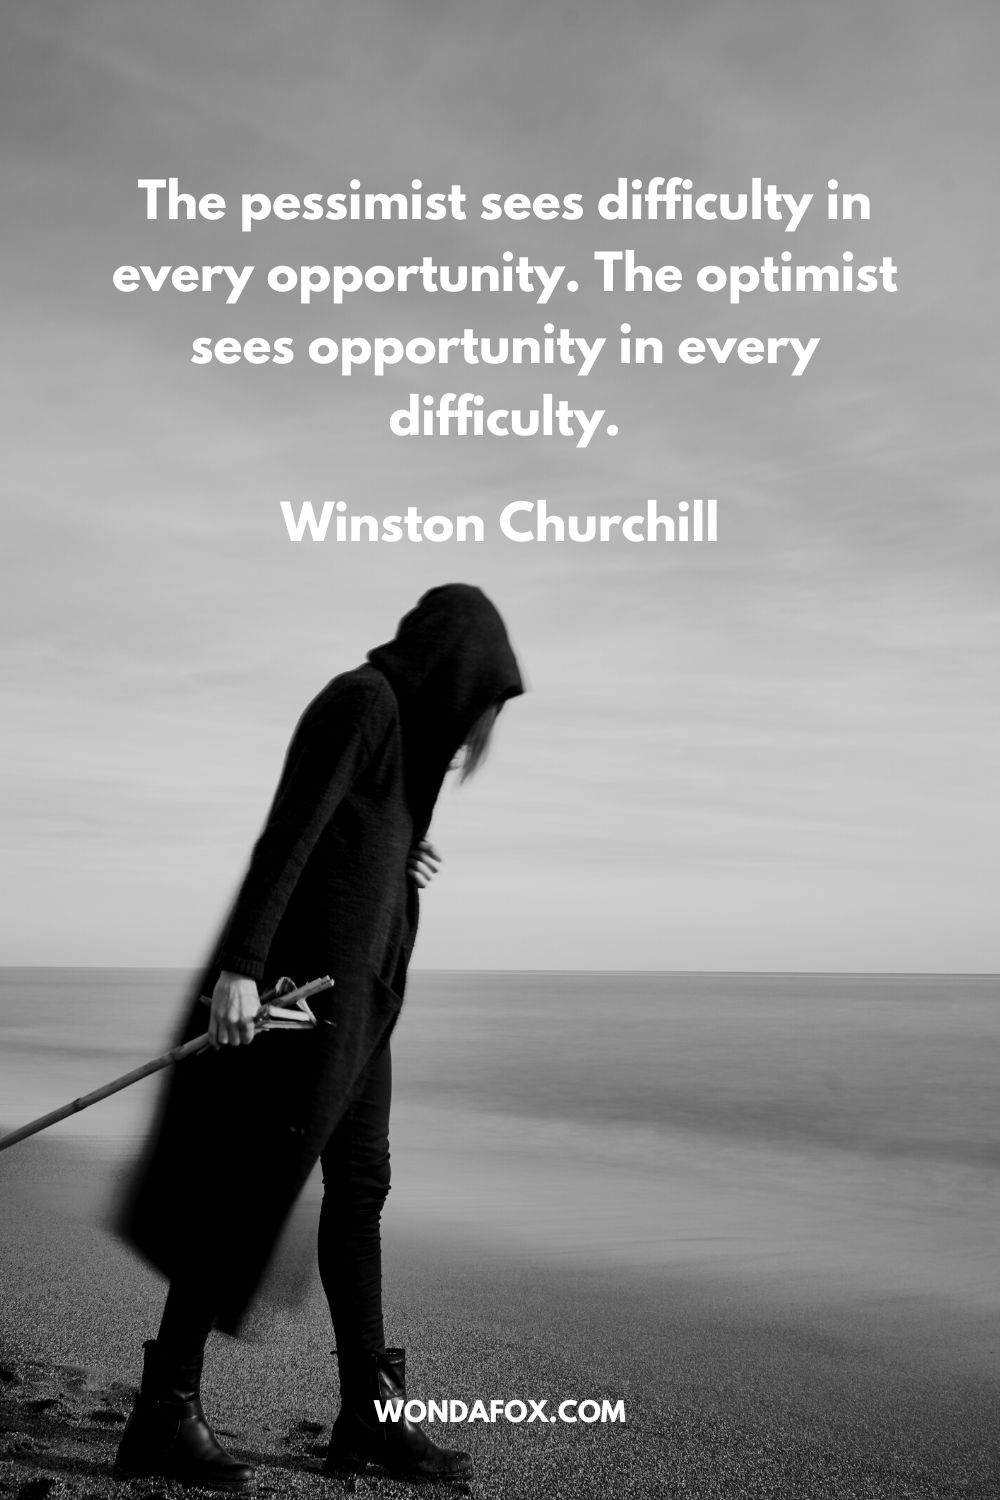 The pessimist sees difficulty in every opportunity. The optimist sees opportunity in every difficulty. Winston Churchill